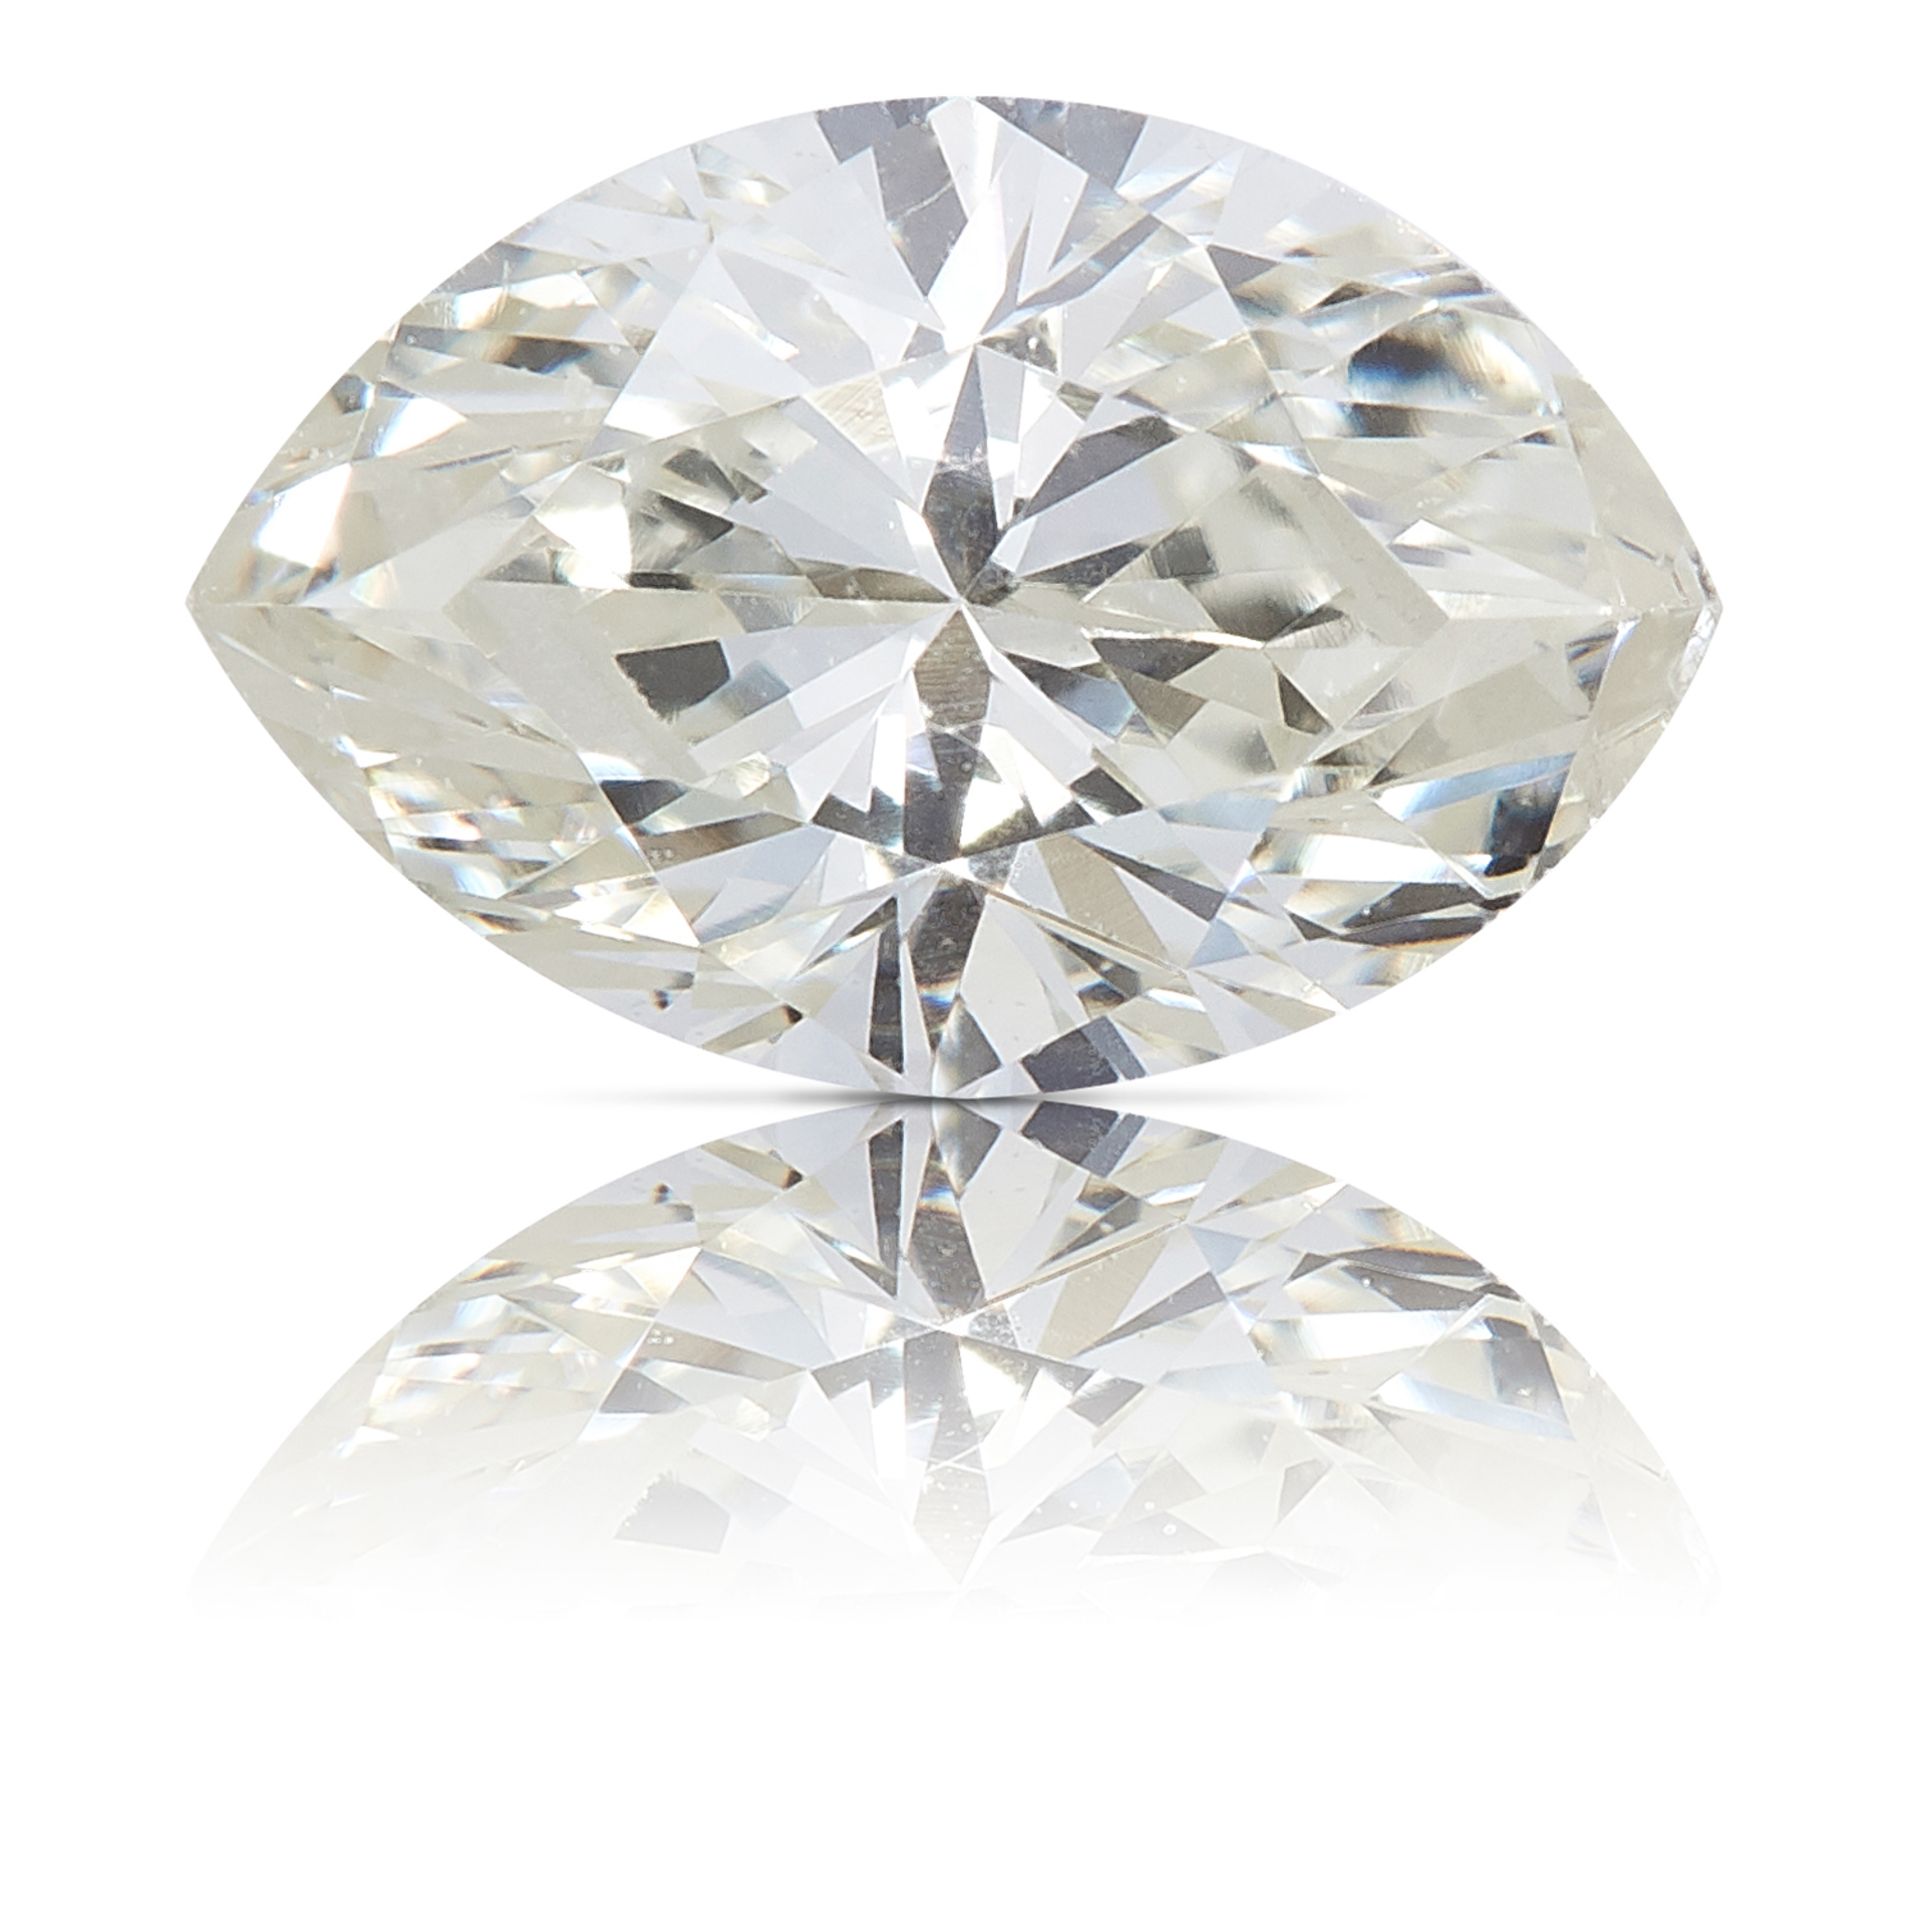 A 0.37ct MARQUISE CUT DIAMOND, UNMOUNTED.